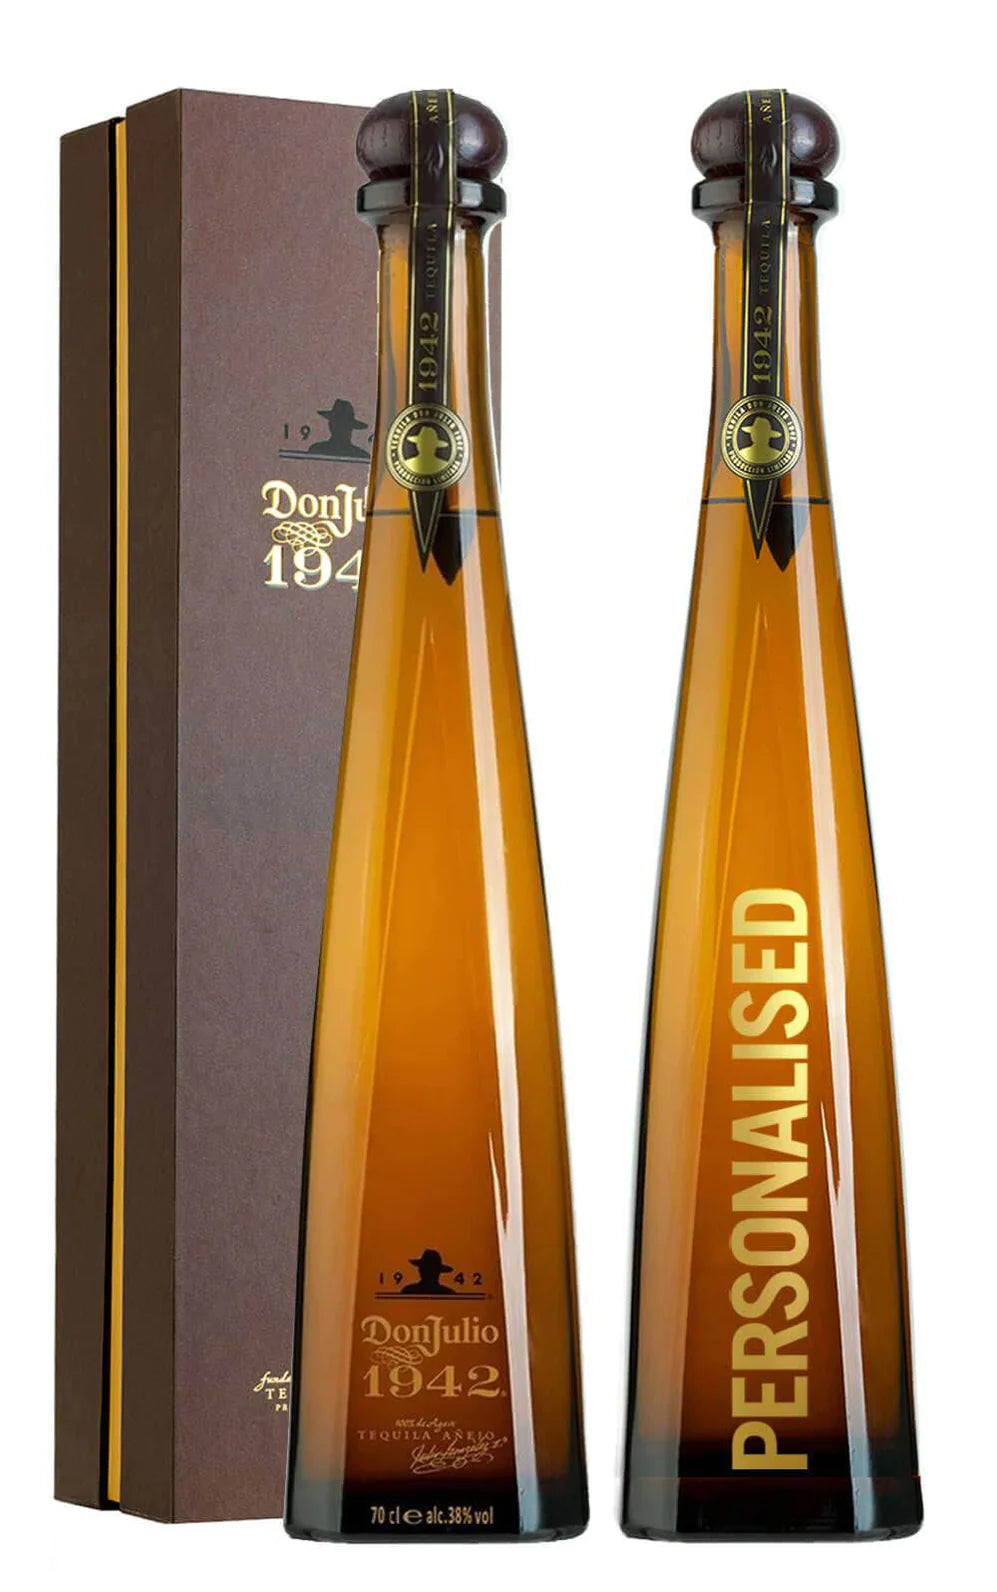 Elegant Don Julio 1942 tequila bottle, showcasing its unique agave-leaf design and luxurious golden amber hue, symbolizing premium quality and the rich heritage of the Don Julio brand. 